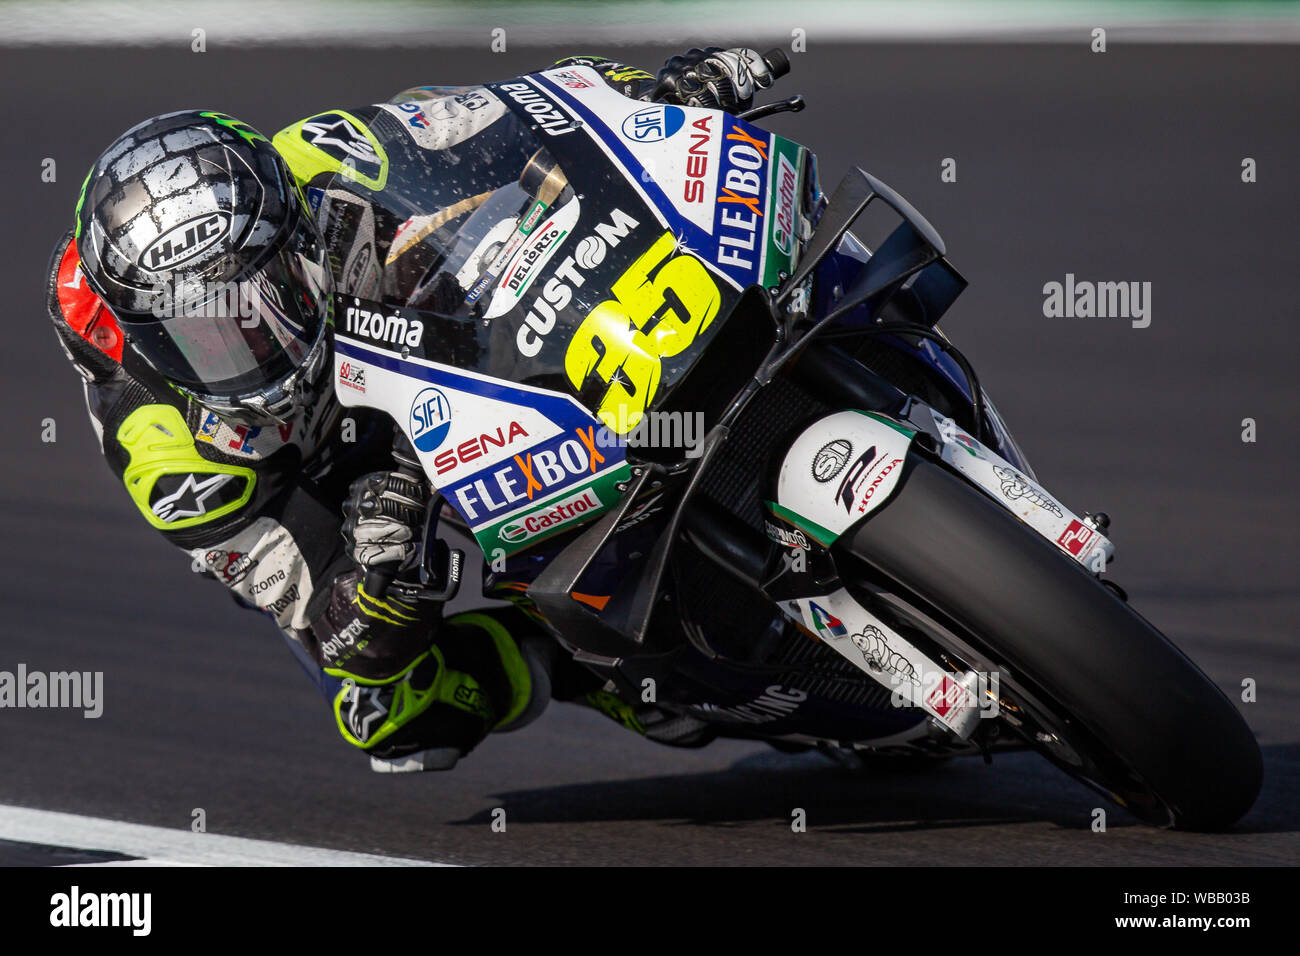 Silverstone, UK. 25th June, 2019. MotoGP rider Cal Crutchlow (LCR Honda CASTROL) during warm up at the 2019 GoPro British Grand Prix (MotoGP) at Silverstone Circuit, Towcester, England on 25 August 2019. Photo by David Horn Credit: PRiME Media Images/Alamy Live News Stock Photo